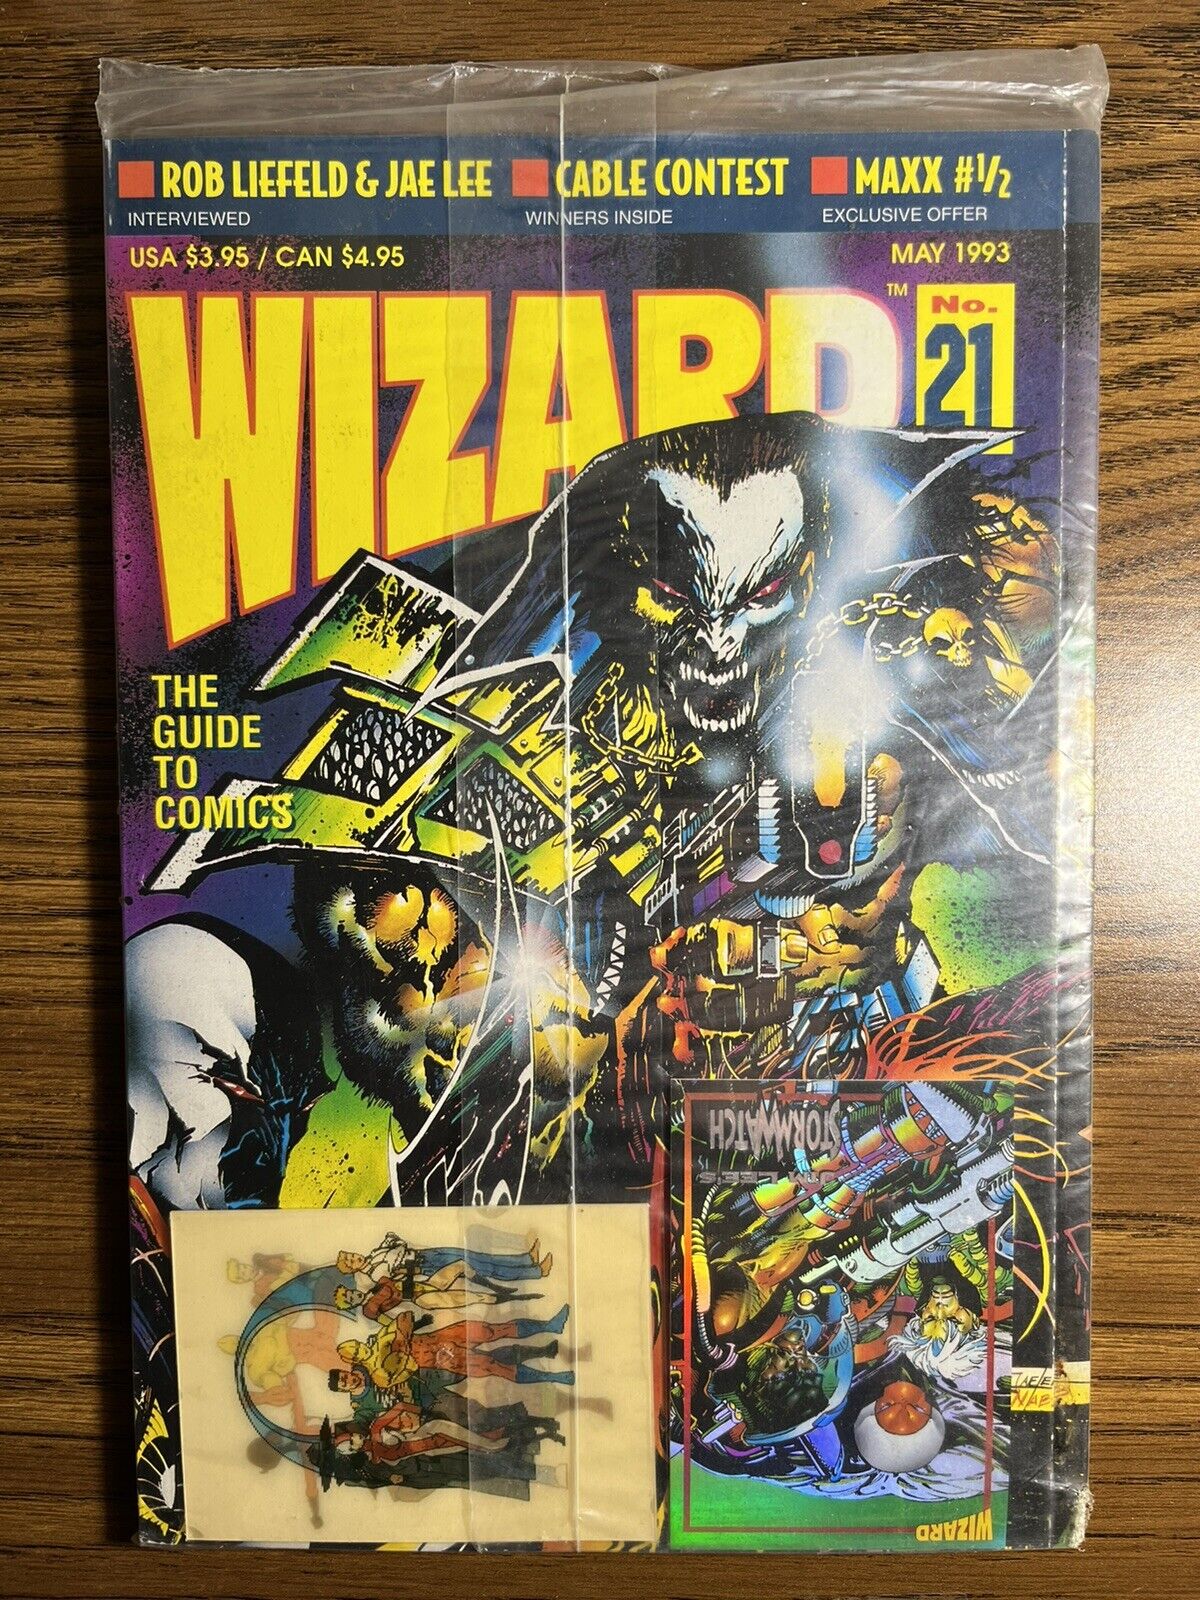 WIZARD: THE MAGAZINE OF COMICS 21 NM/NM+ FACTORY SEALED GORGEOUS CARDS INCLUDED